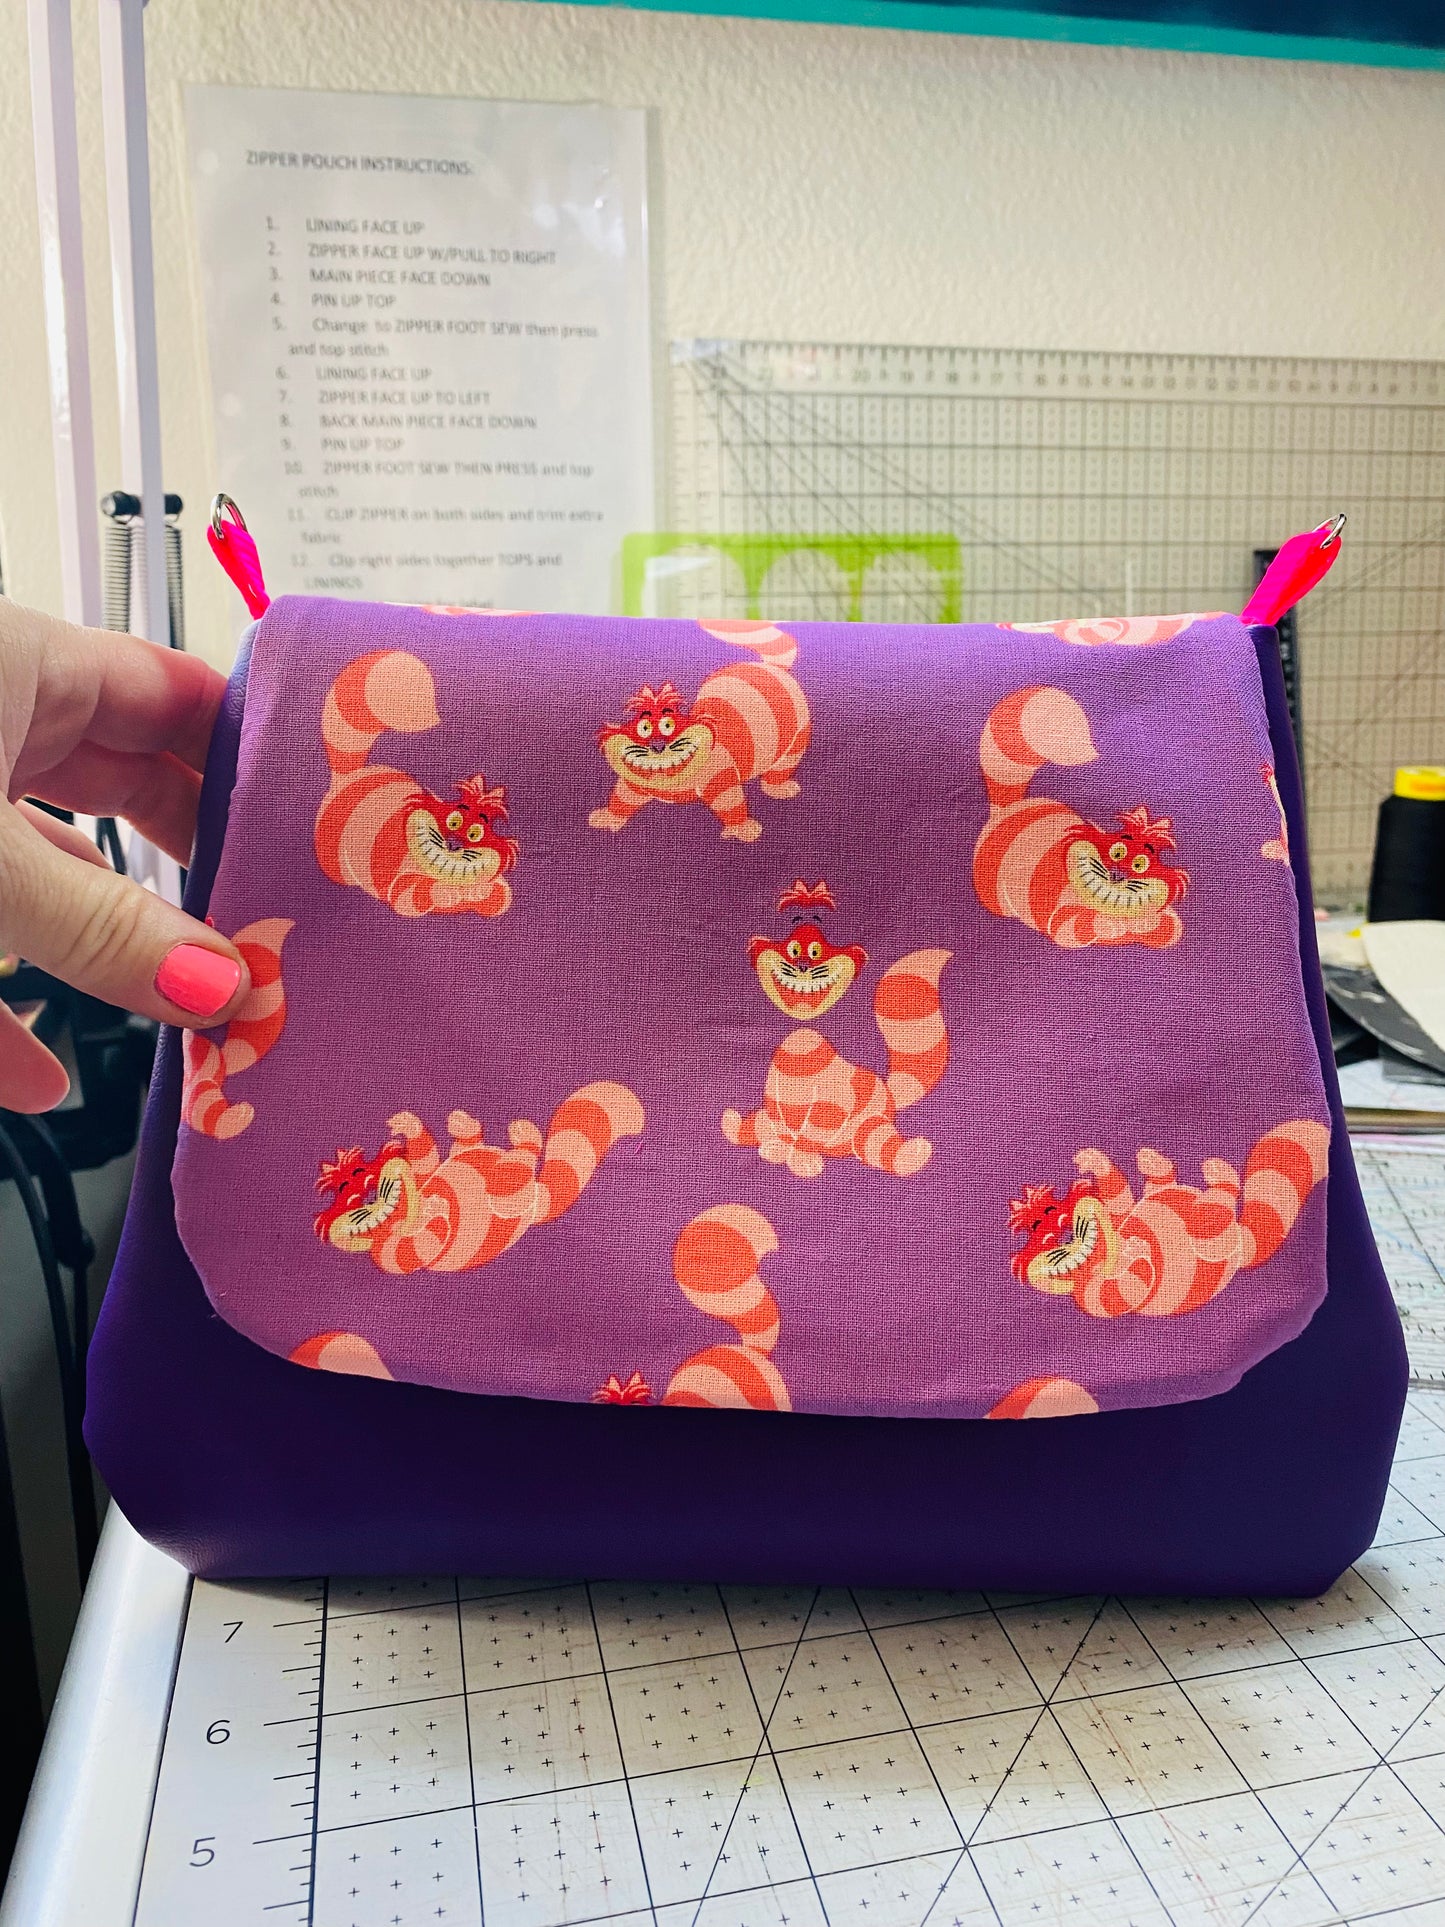 Cheshire Cat crossover bag